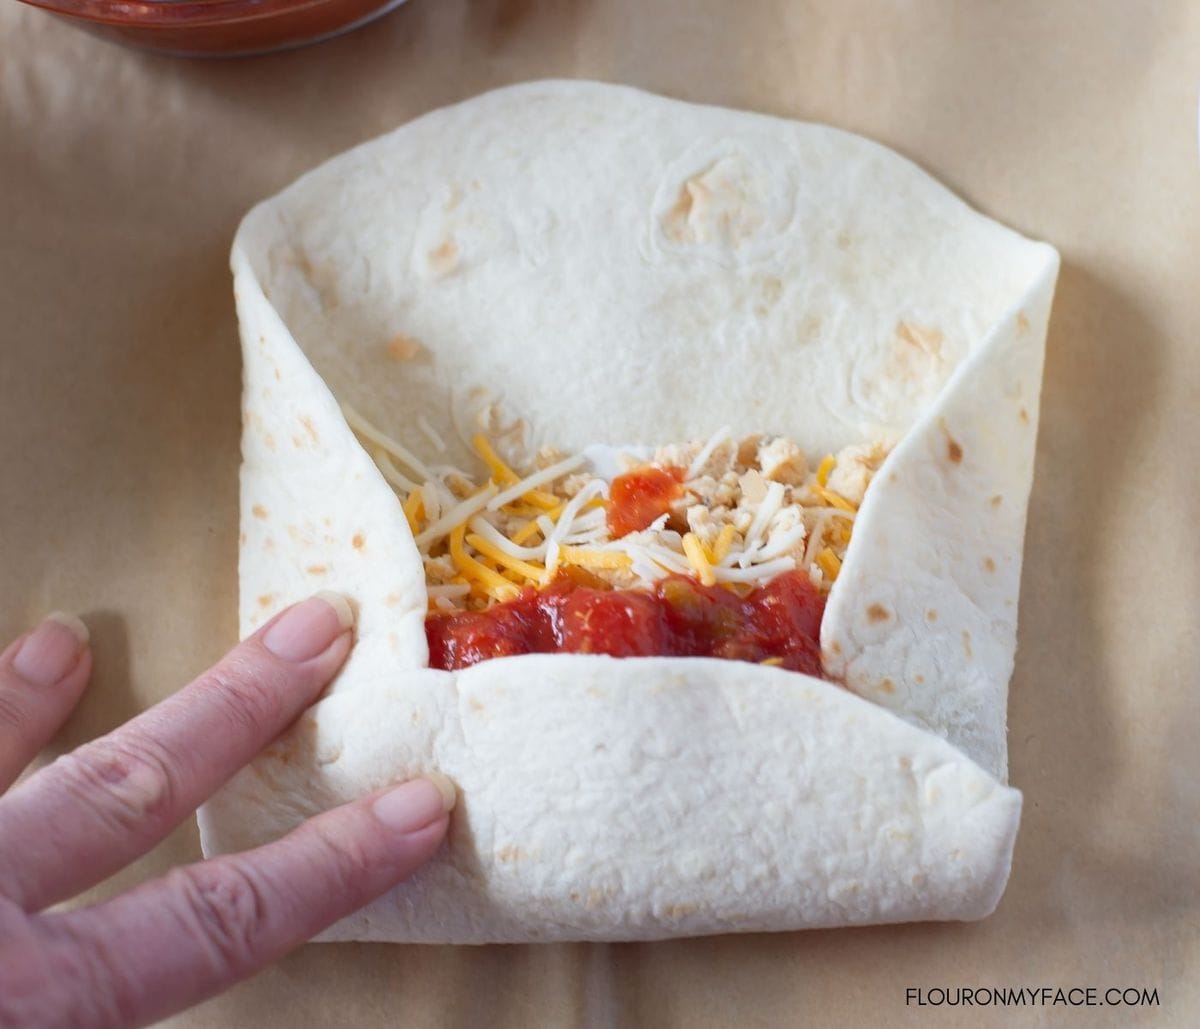 Photo example of how to roll up a breakfast burrito.